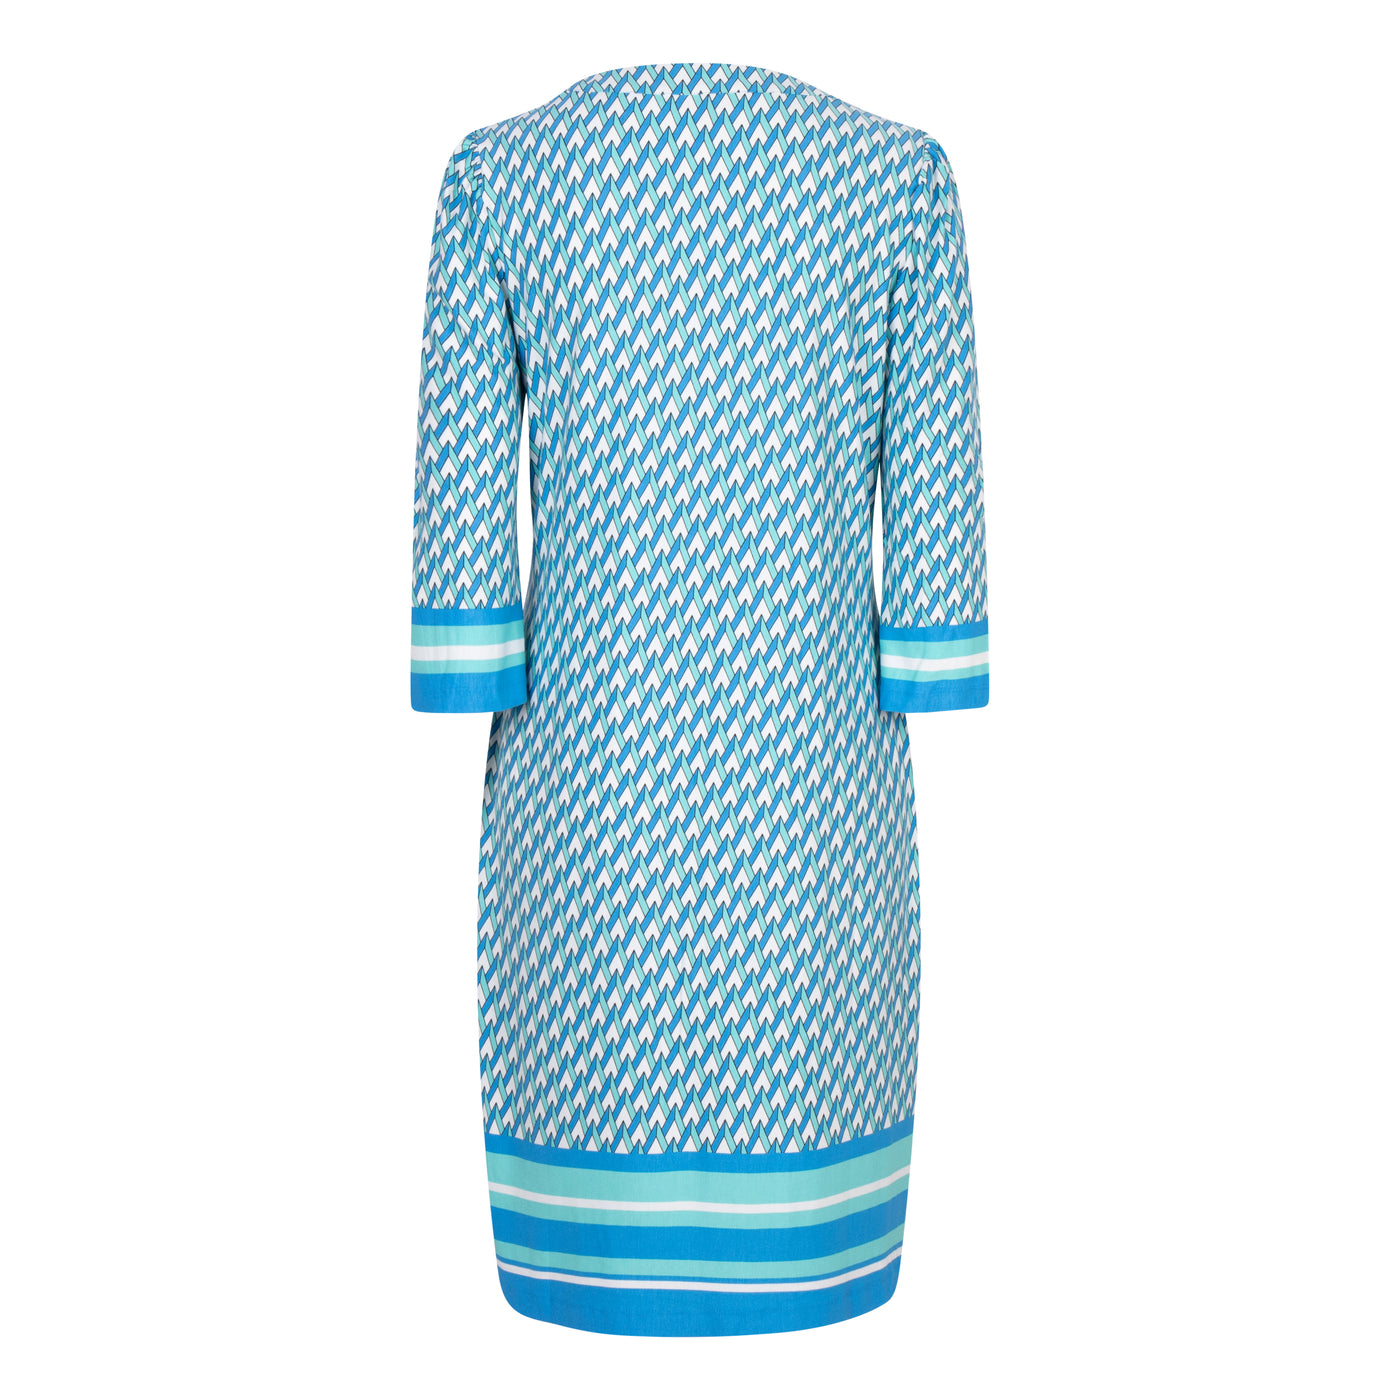 Bayside Print Dress with Button Detail